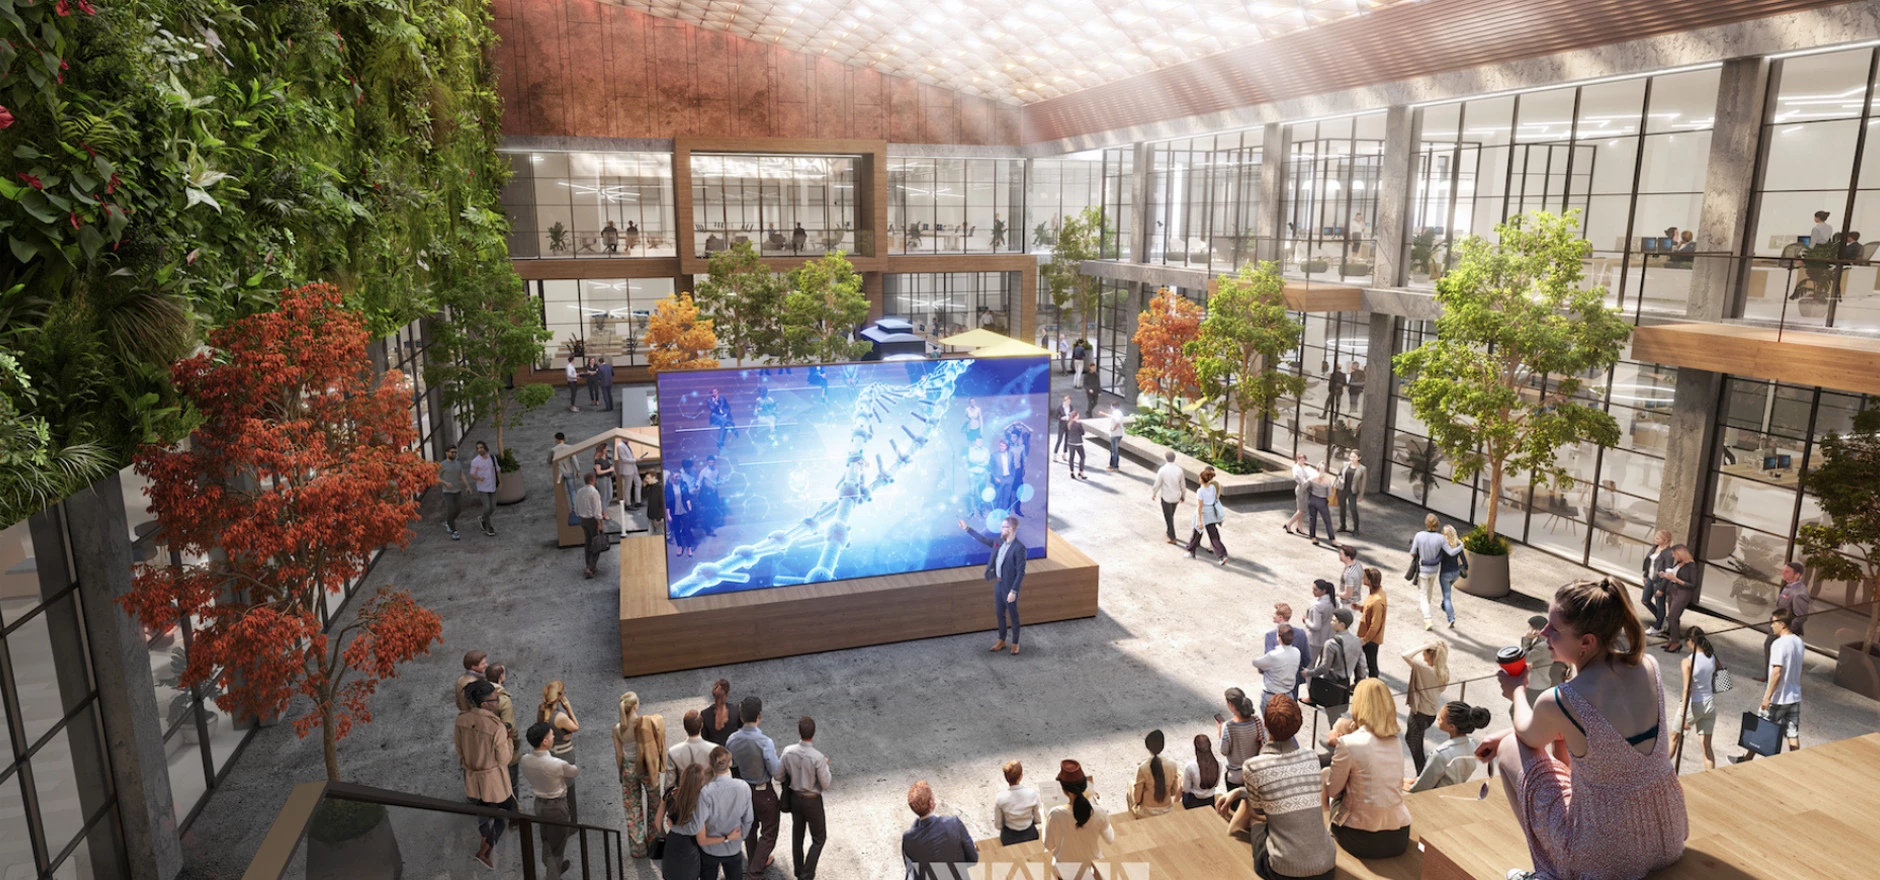 Pioneer Group's vision for the Grafton Centre